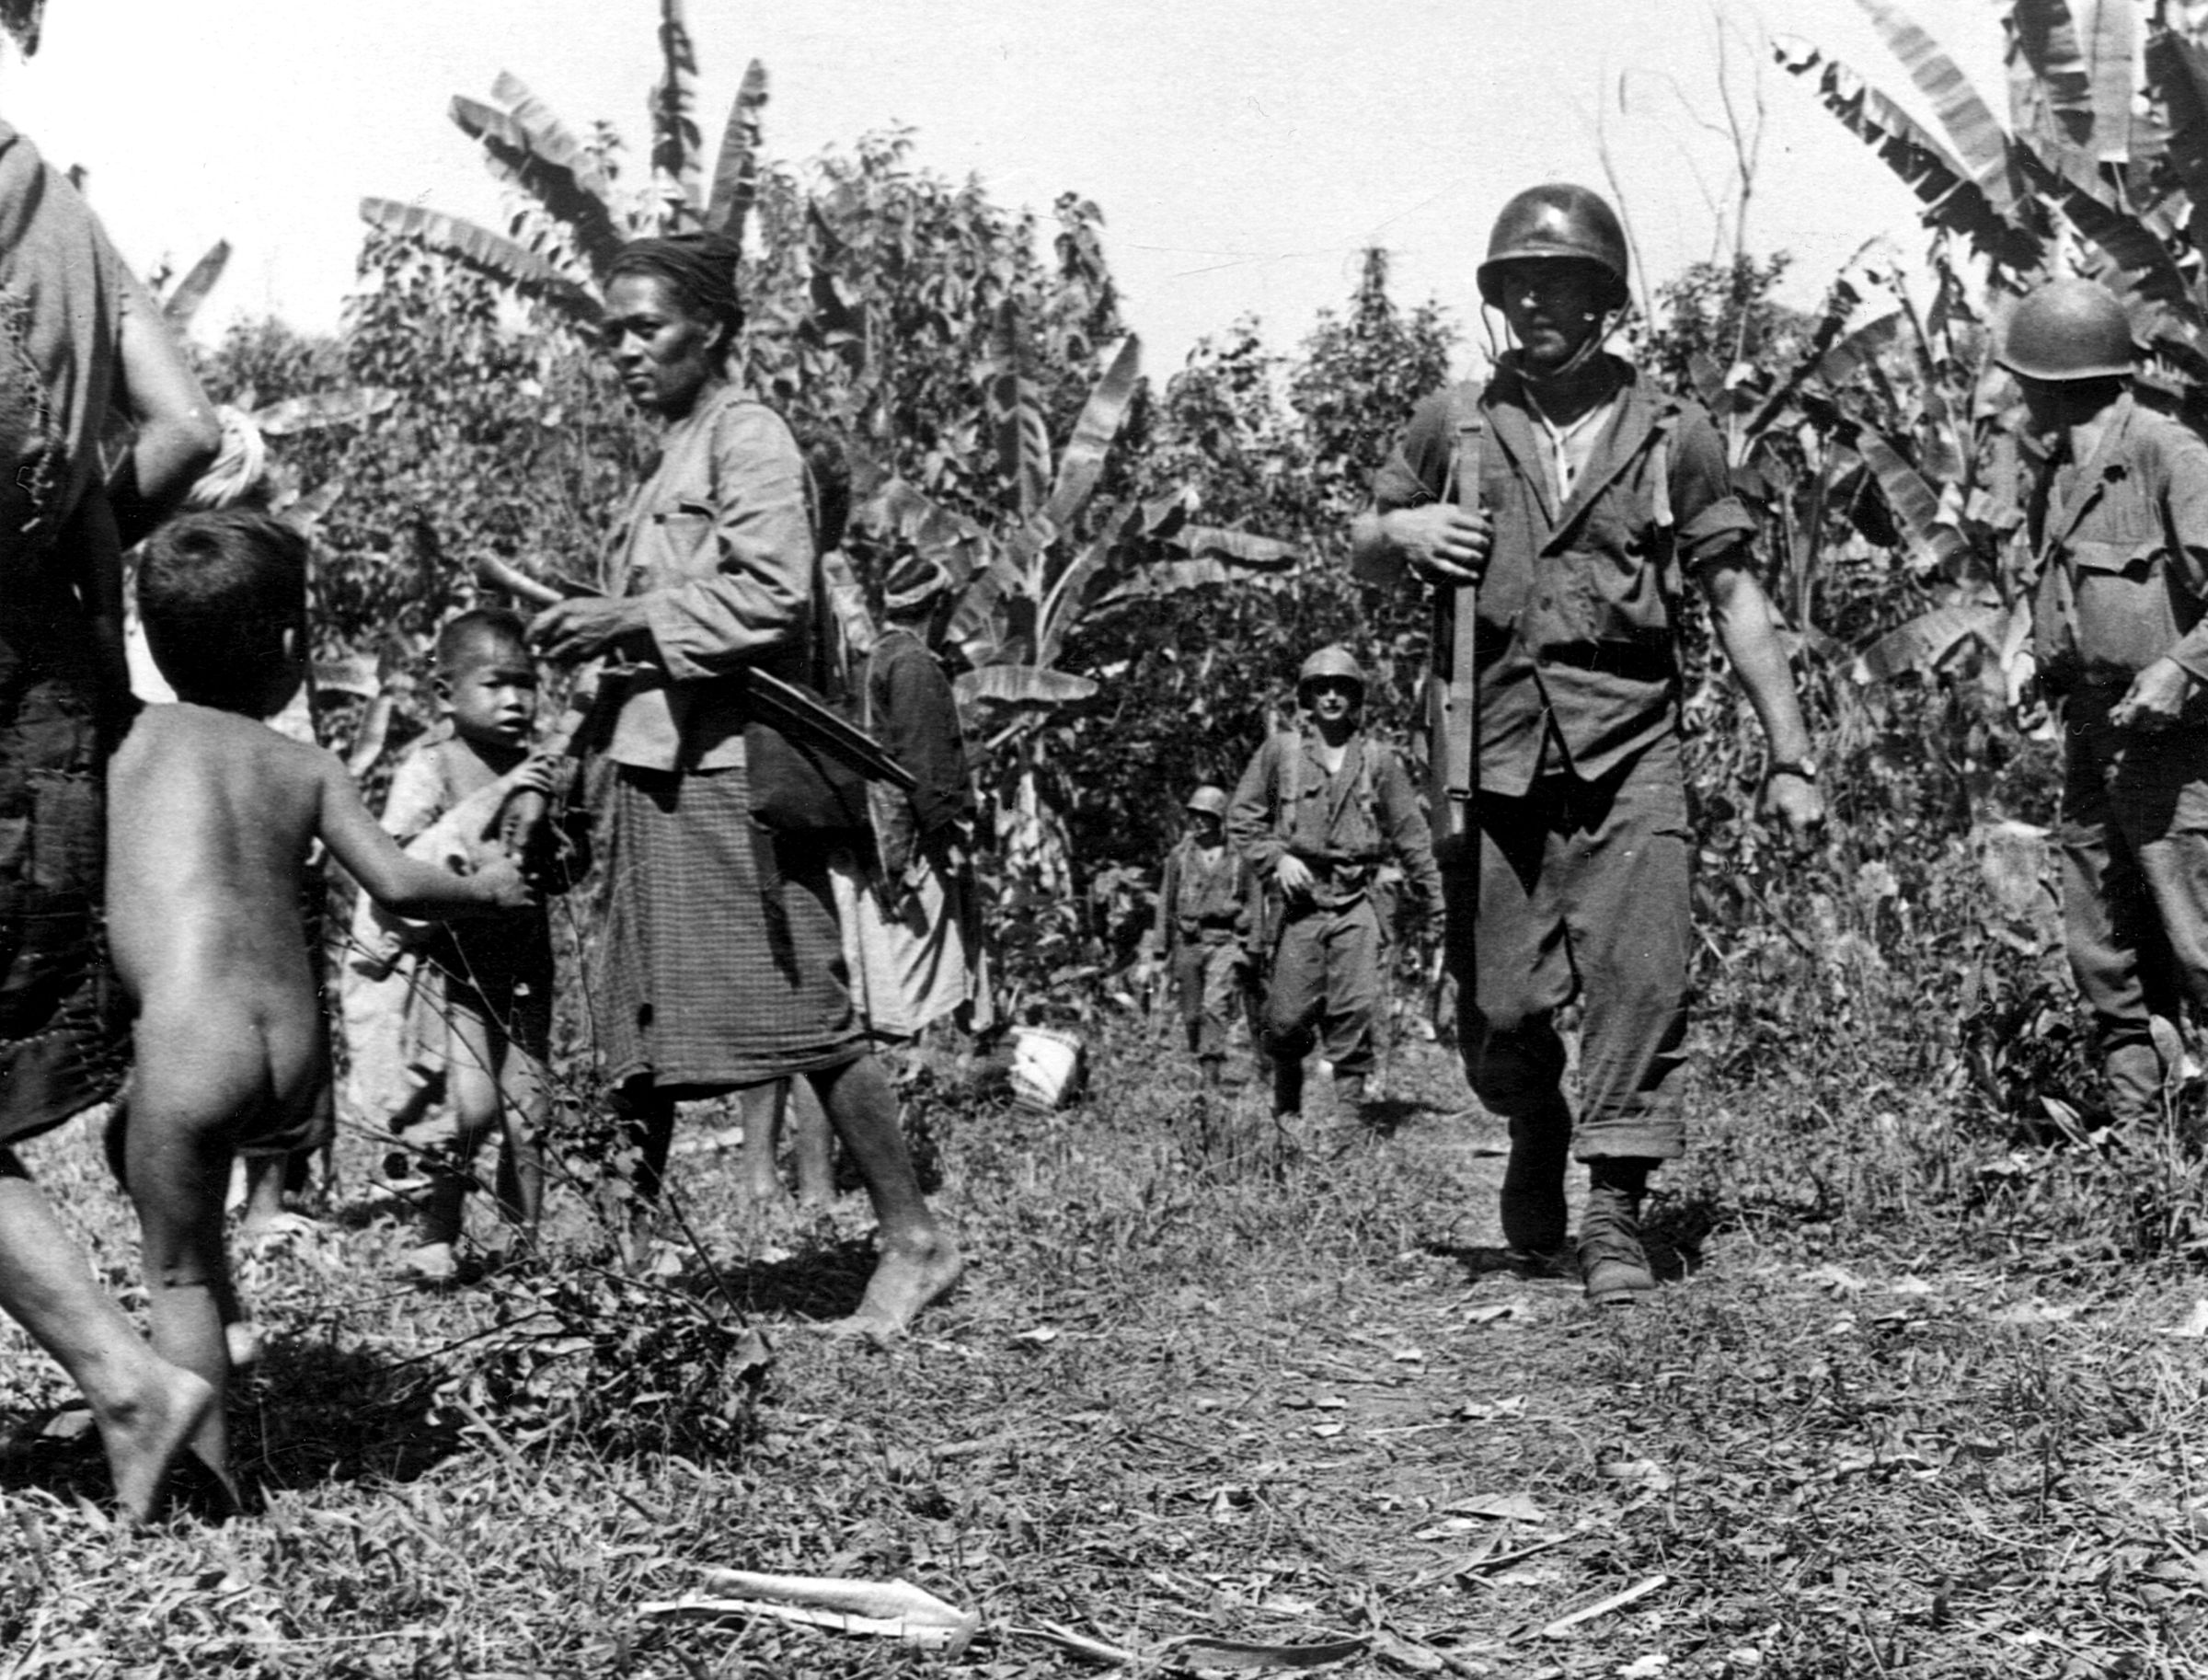 Passing through a Burmese village in March 1944, a group of Merrill’s Marauders emerge from the thick jungle. Along with the Japanese, disease and harsh climactic conditions often proved to be destructive foes.